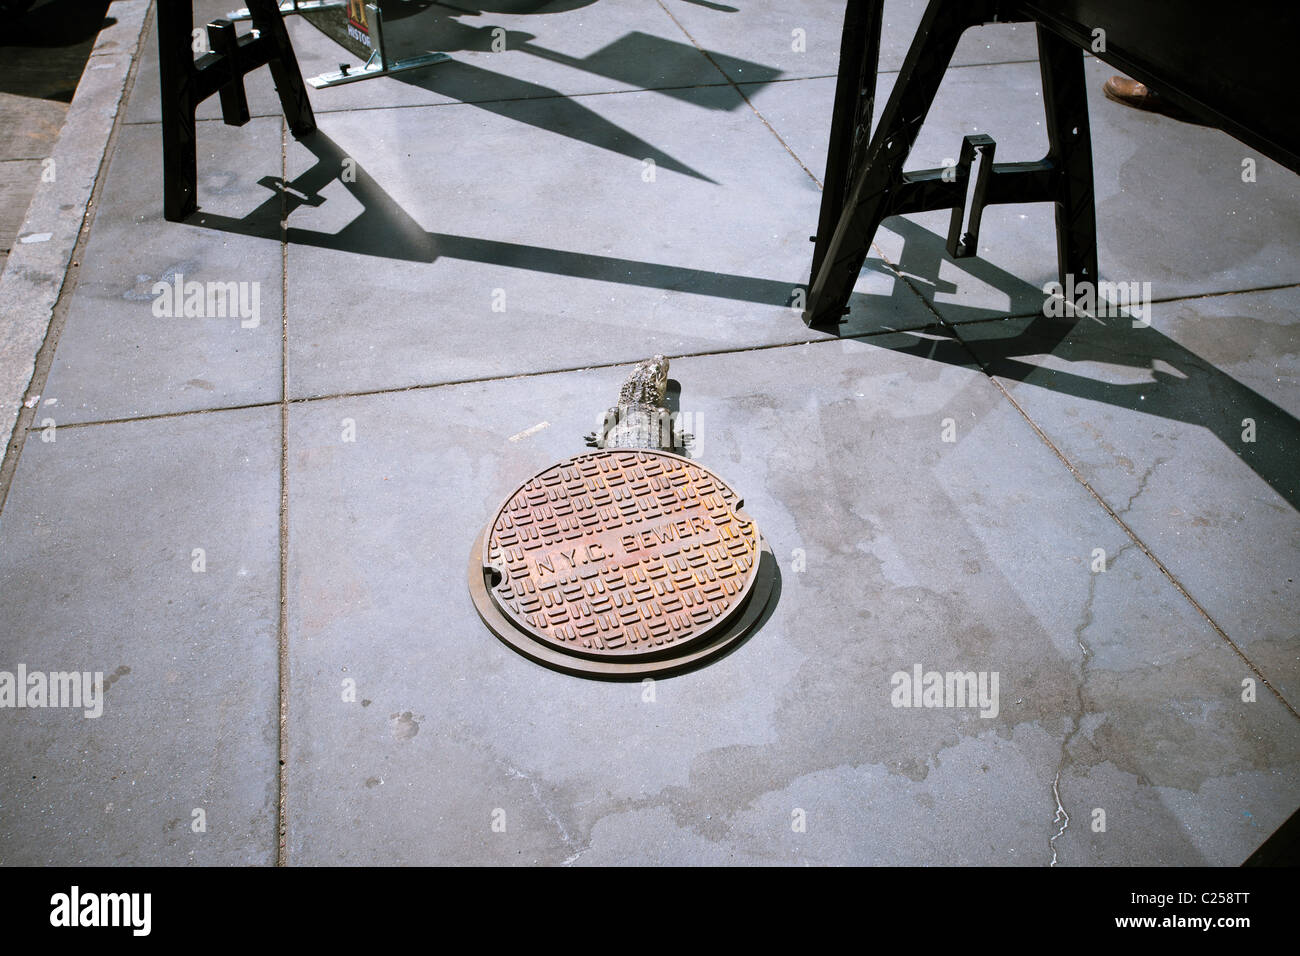 A mock alligator appears to be crawling of of a mock manhole during a promotion of free cajun food Stock Photo